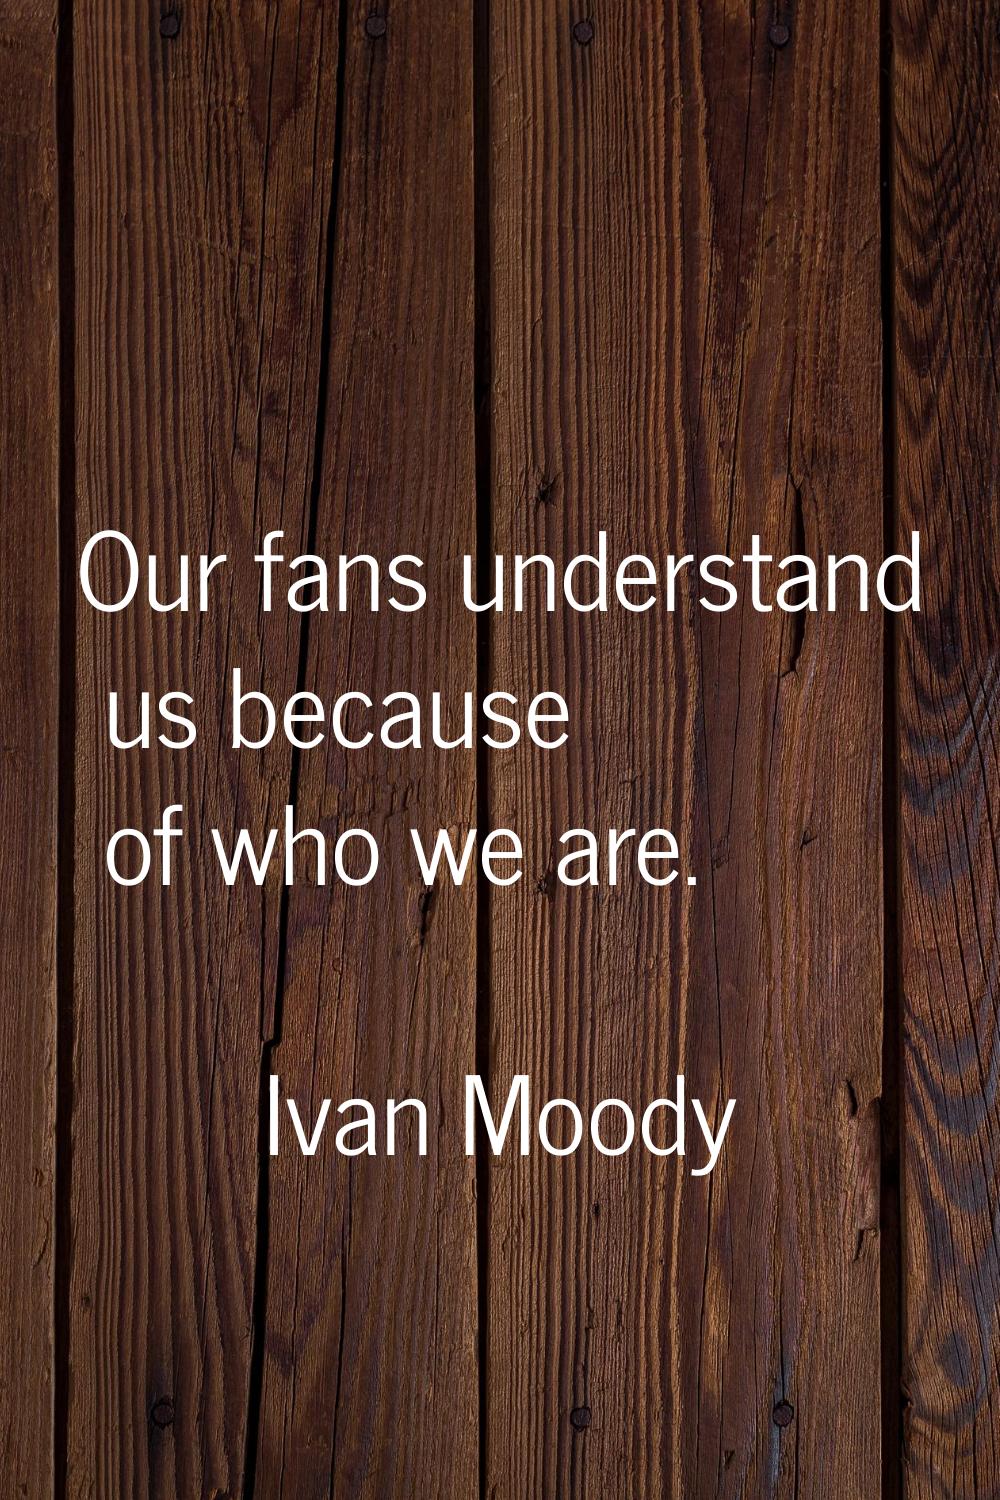 Our fans understand us because of who we are.